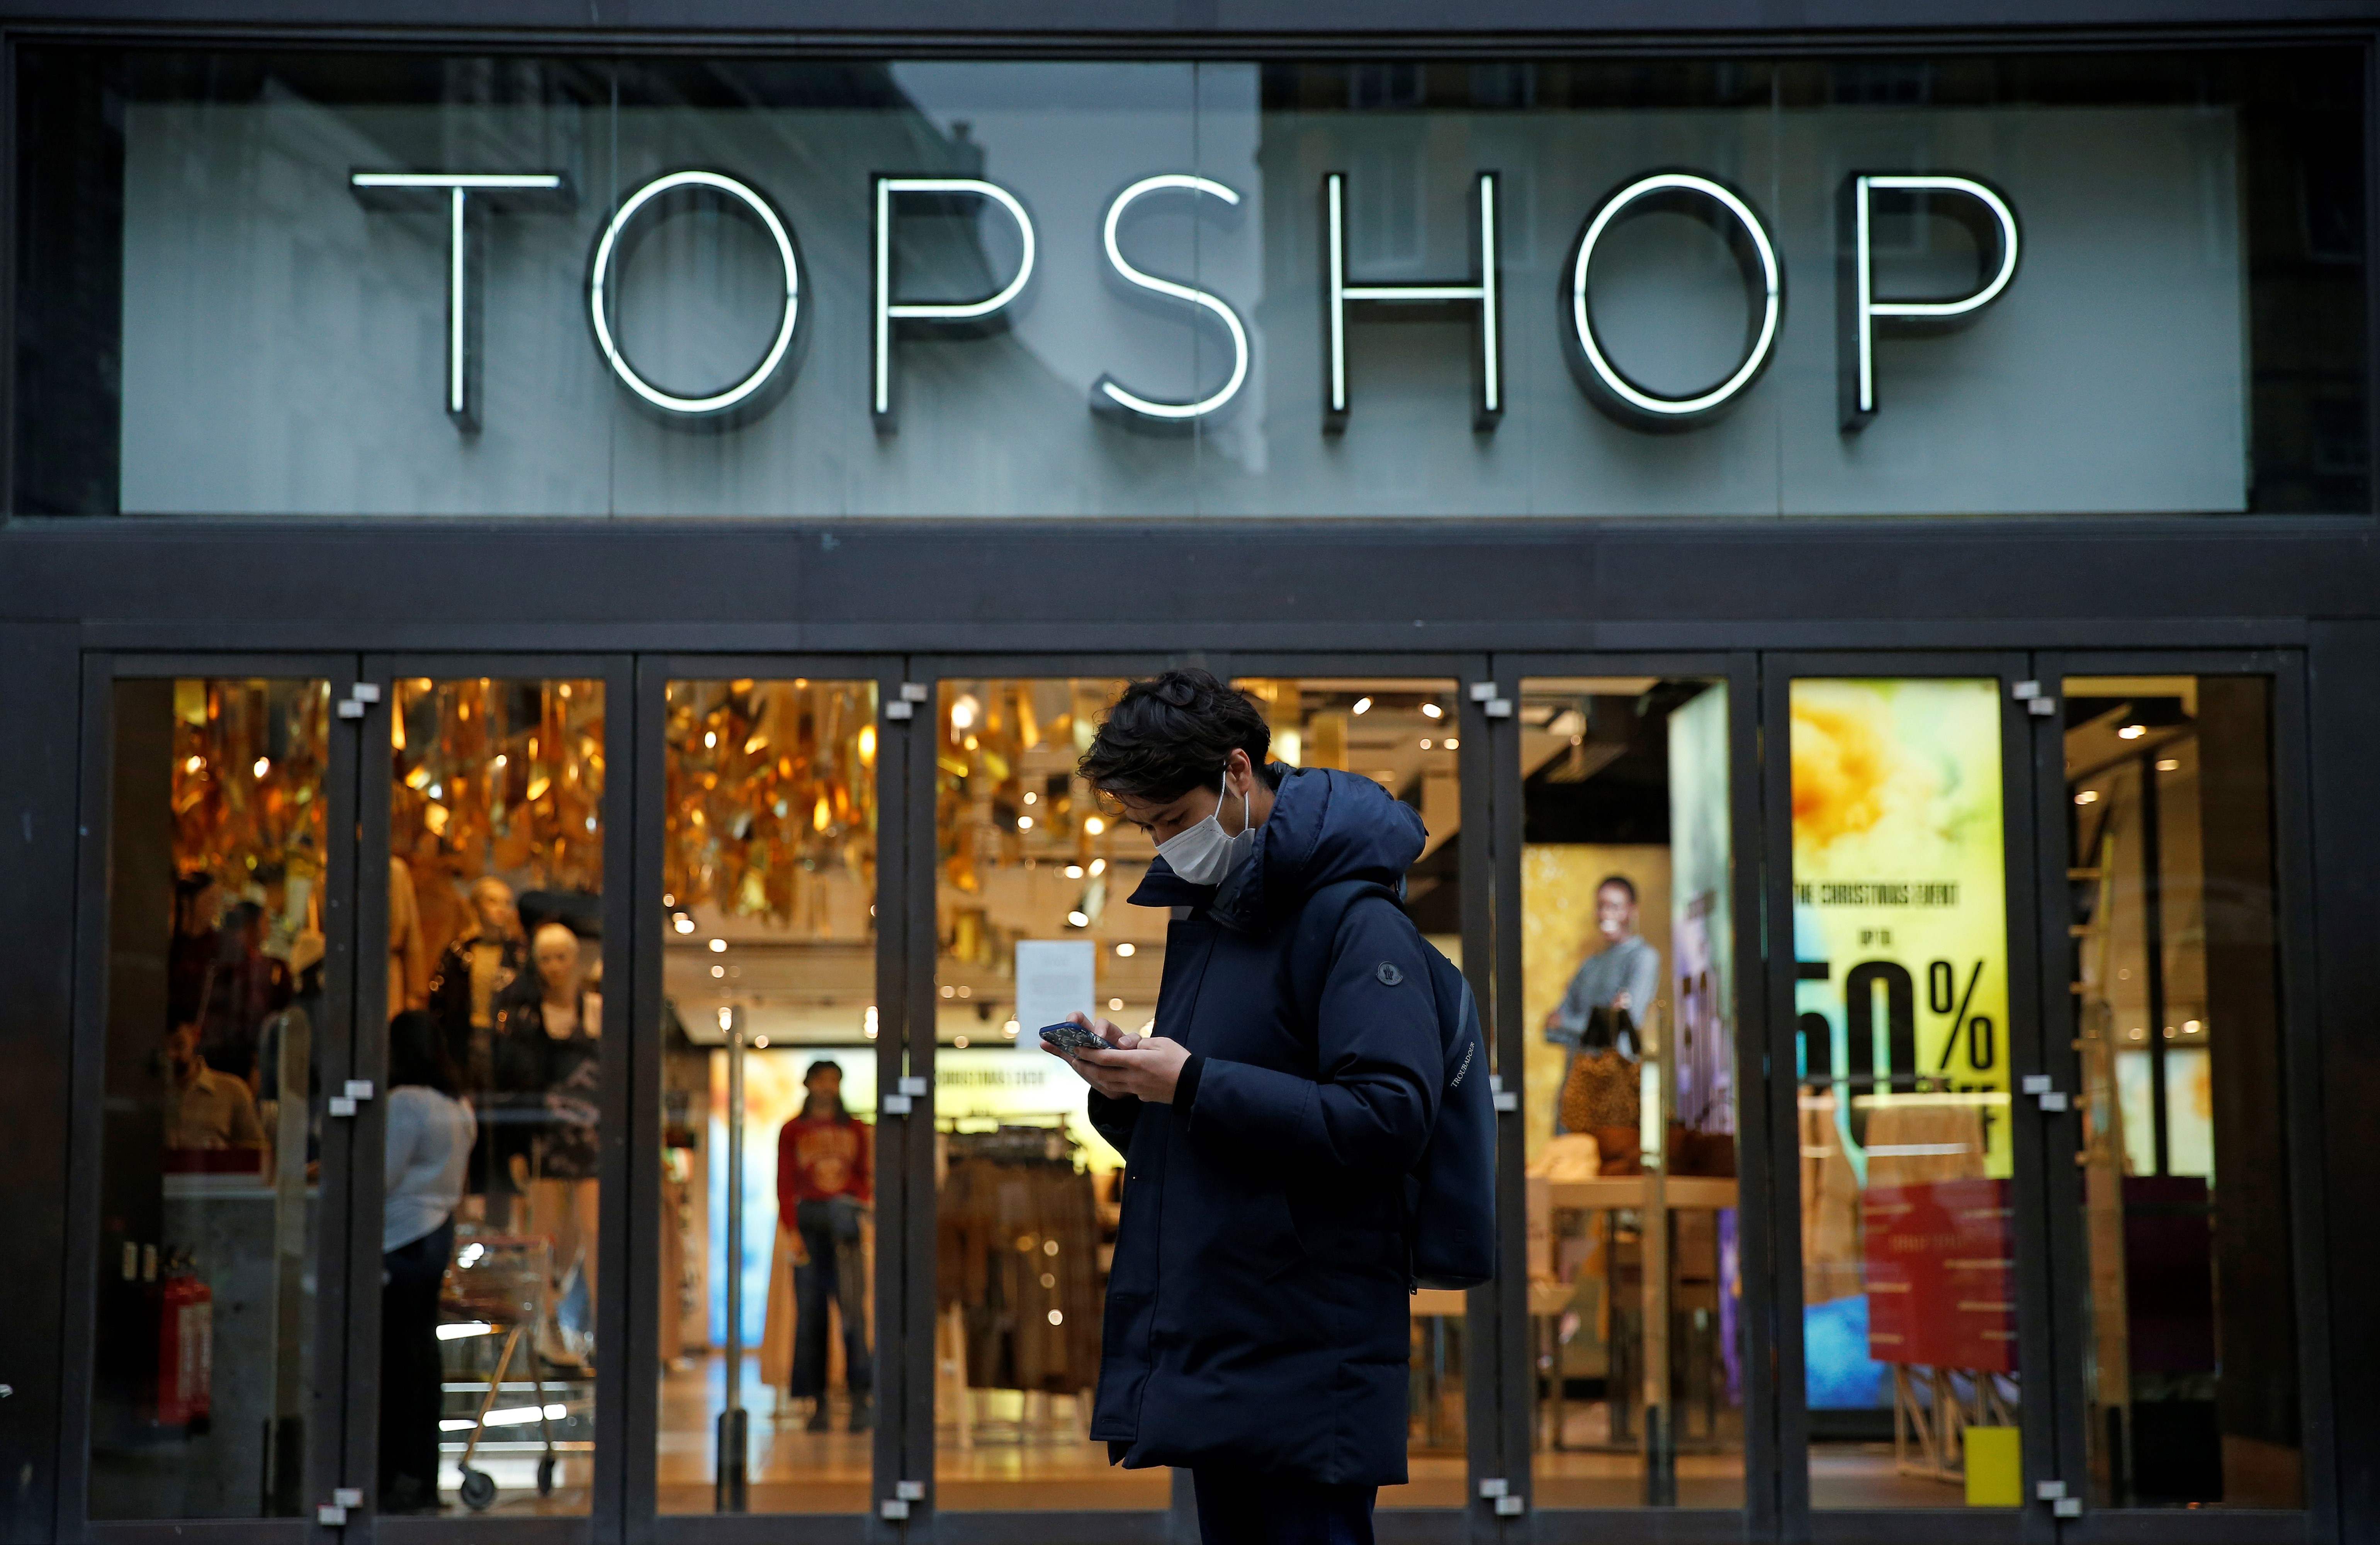 Topshop, one of Arcadia Group’s brands now up for sale